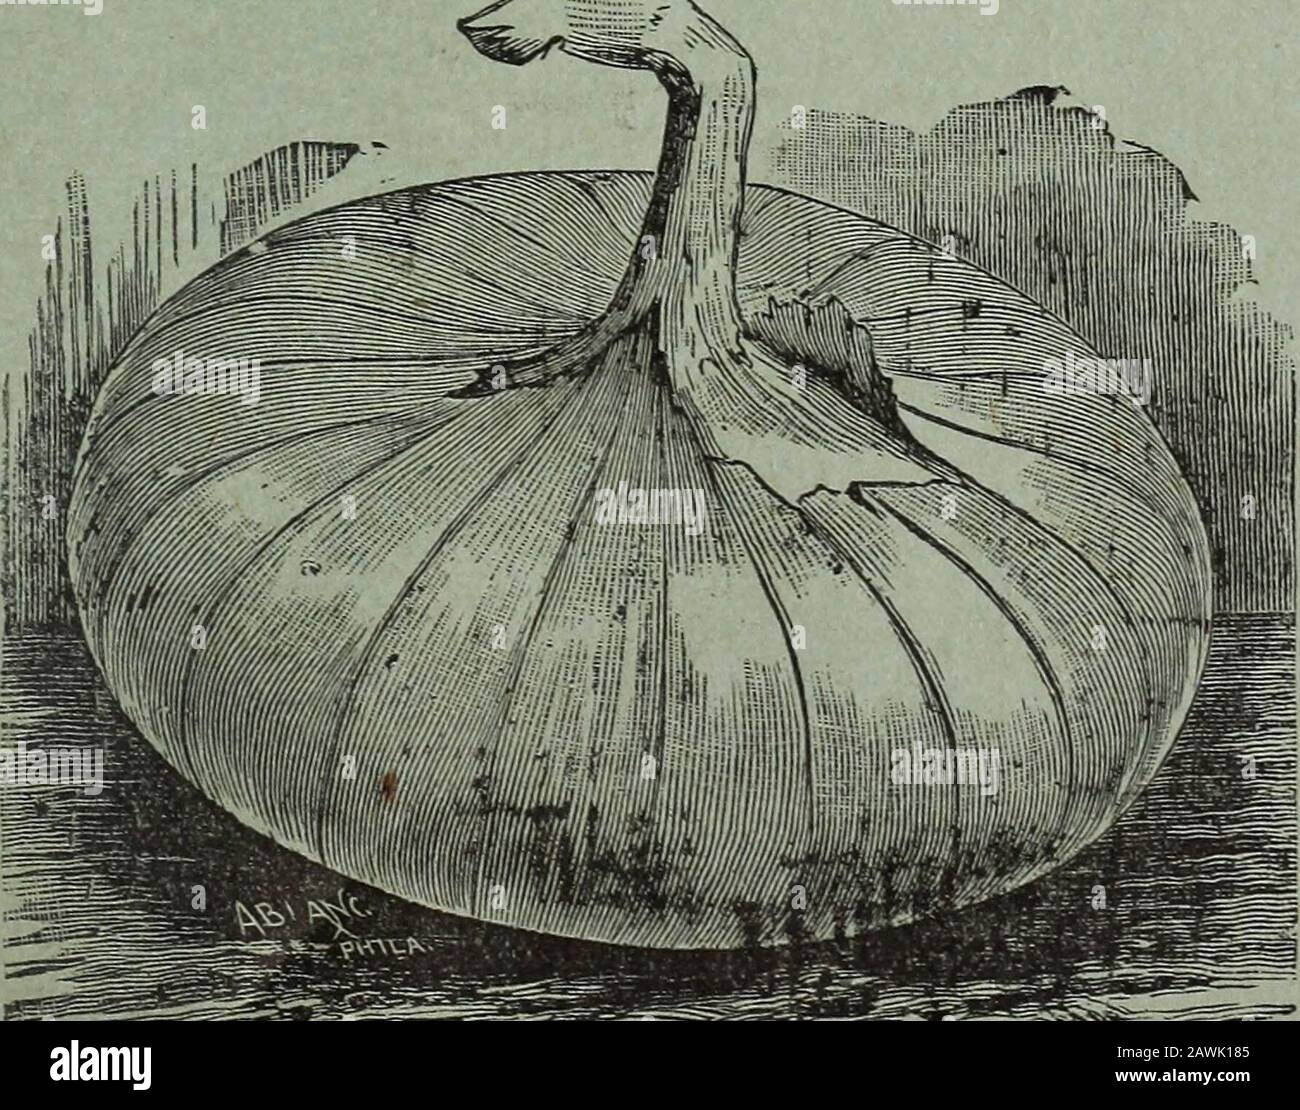 Cole's garden annual . mammoth silverKing onion. This new variety grows to a re-markable size, larger than anyother variety in cultivation. Bulbsare of attractive form, flattened,but thick through, as shown in theillustration. The average diam-eter of the onions is from 5 to 7i4inches, thus making the circum-ference from 15 to22 inches. Singlebulbs often attain weights of from2^ to 4 lbs. each. The skin is abeautiful silvery white; the fleshis snow white, and of a particularlymild and pleasant flavor. It ma-tures early and is uniformly largeand perfect form. Per pkt., 7 cts.; oz,, 25 cts.; % l Stock Photo